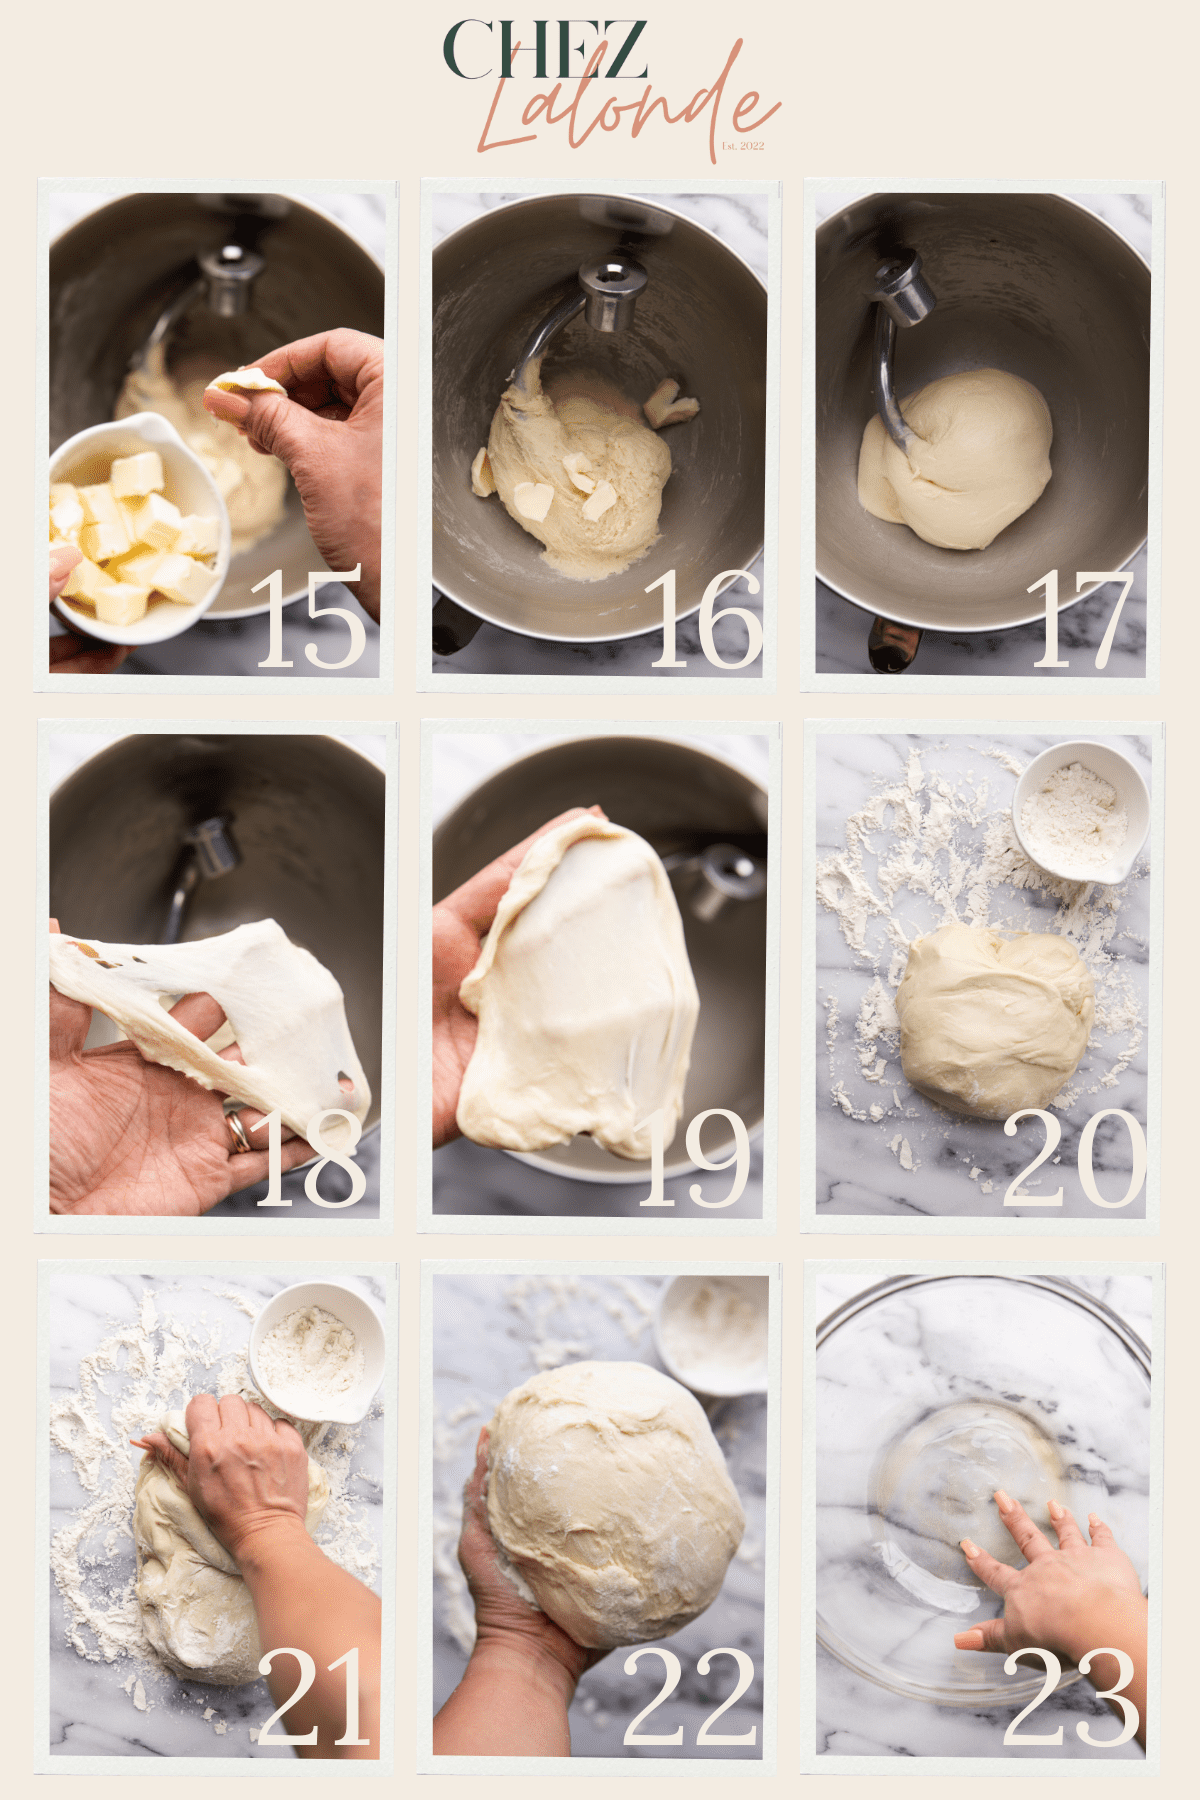 Chez Lalonde Japanese milk bread making process step by step instruction part 2